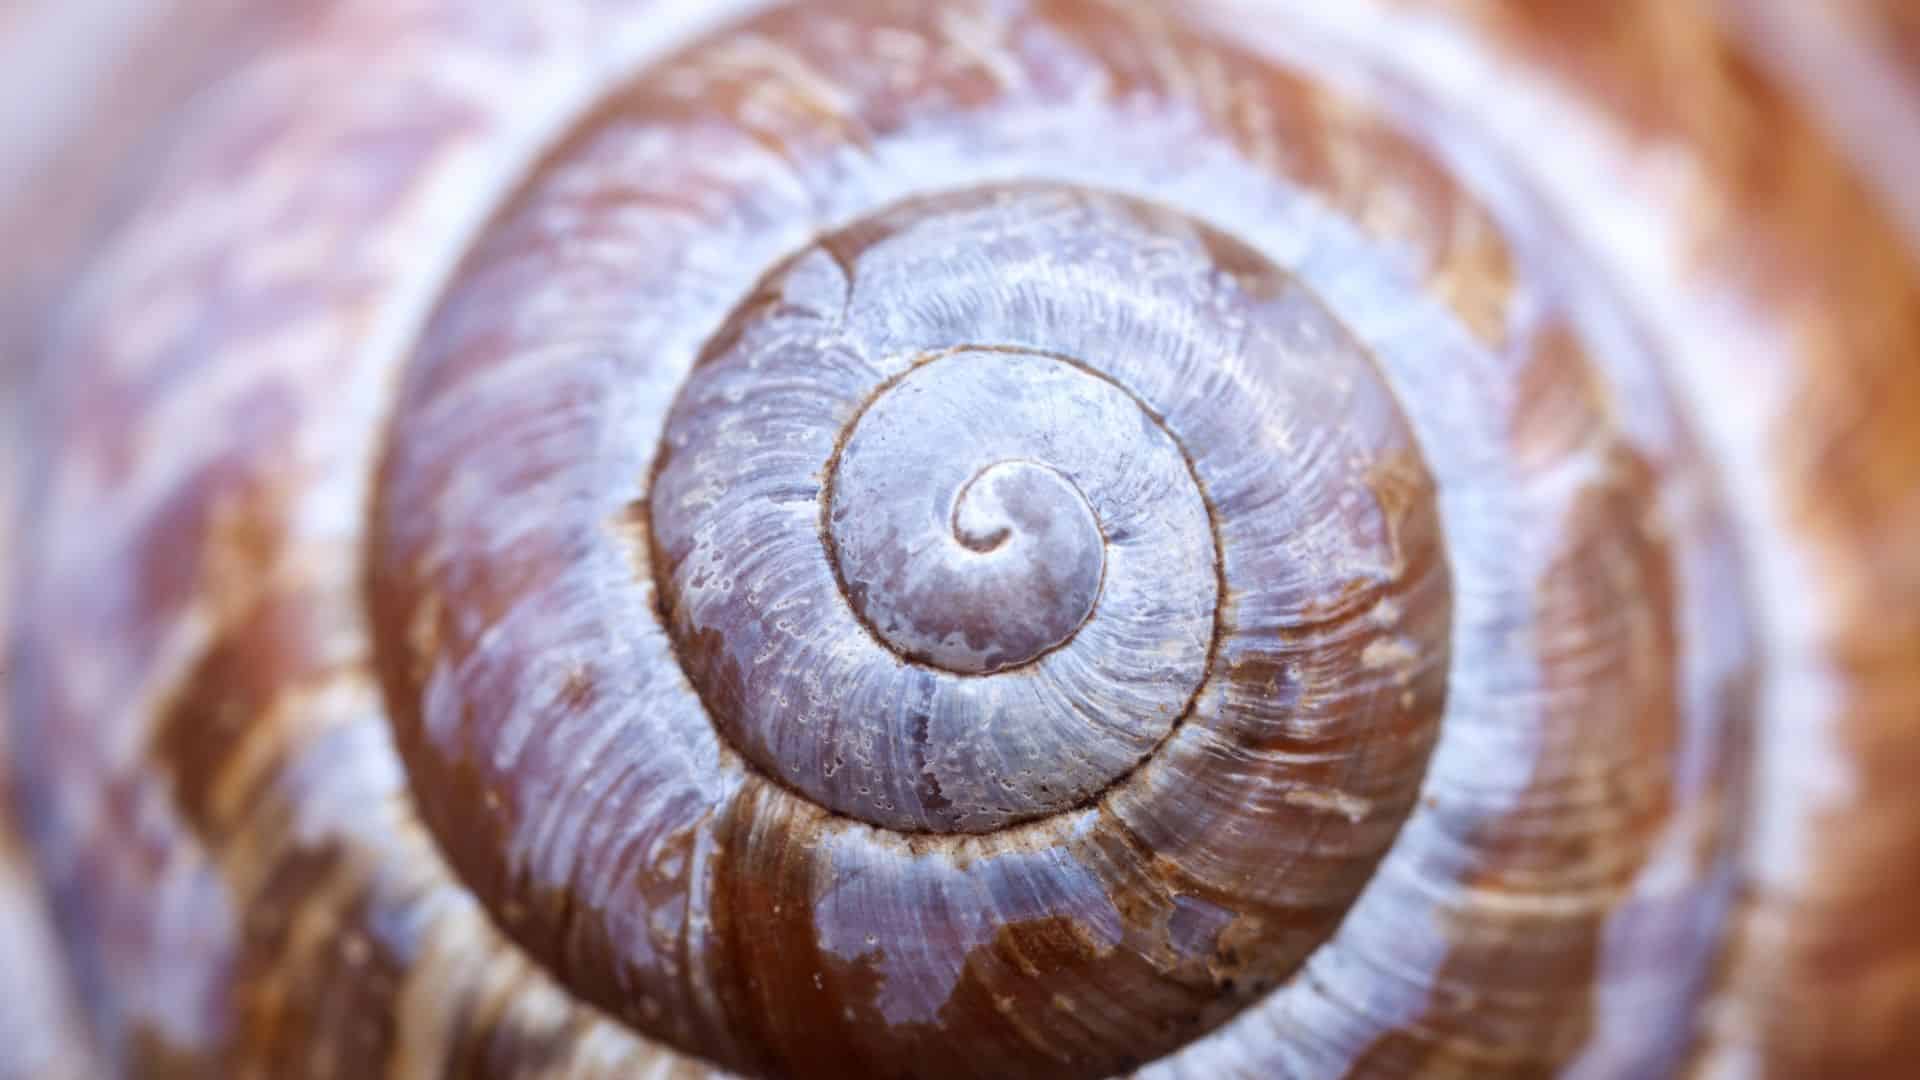 image of a spiral shell